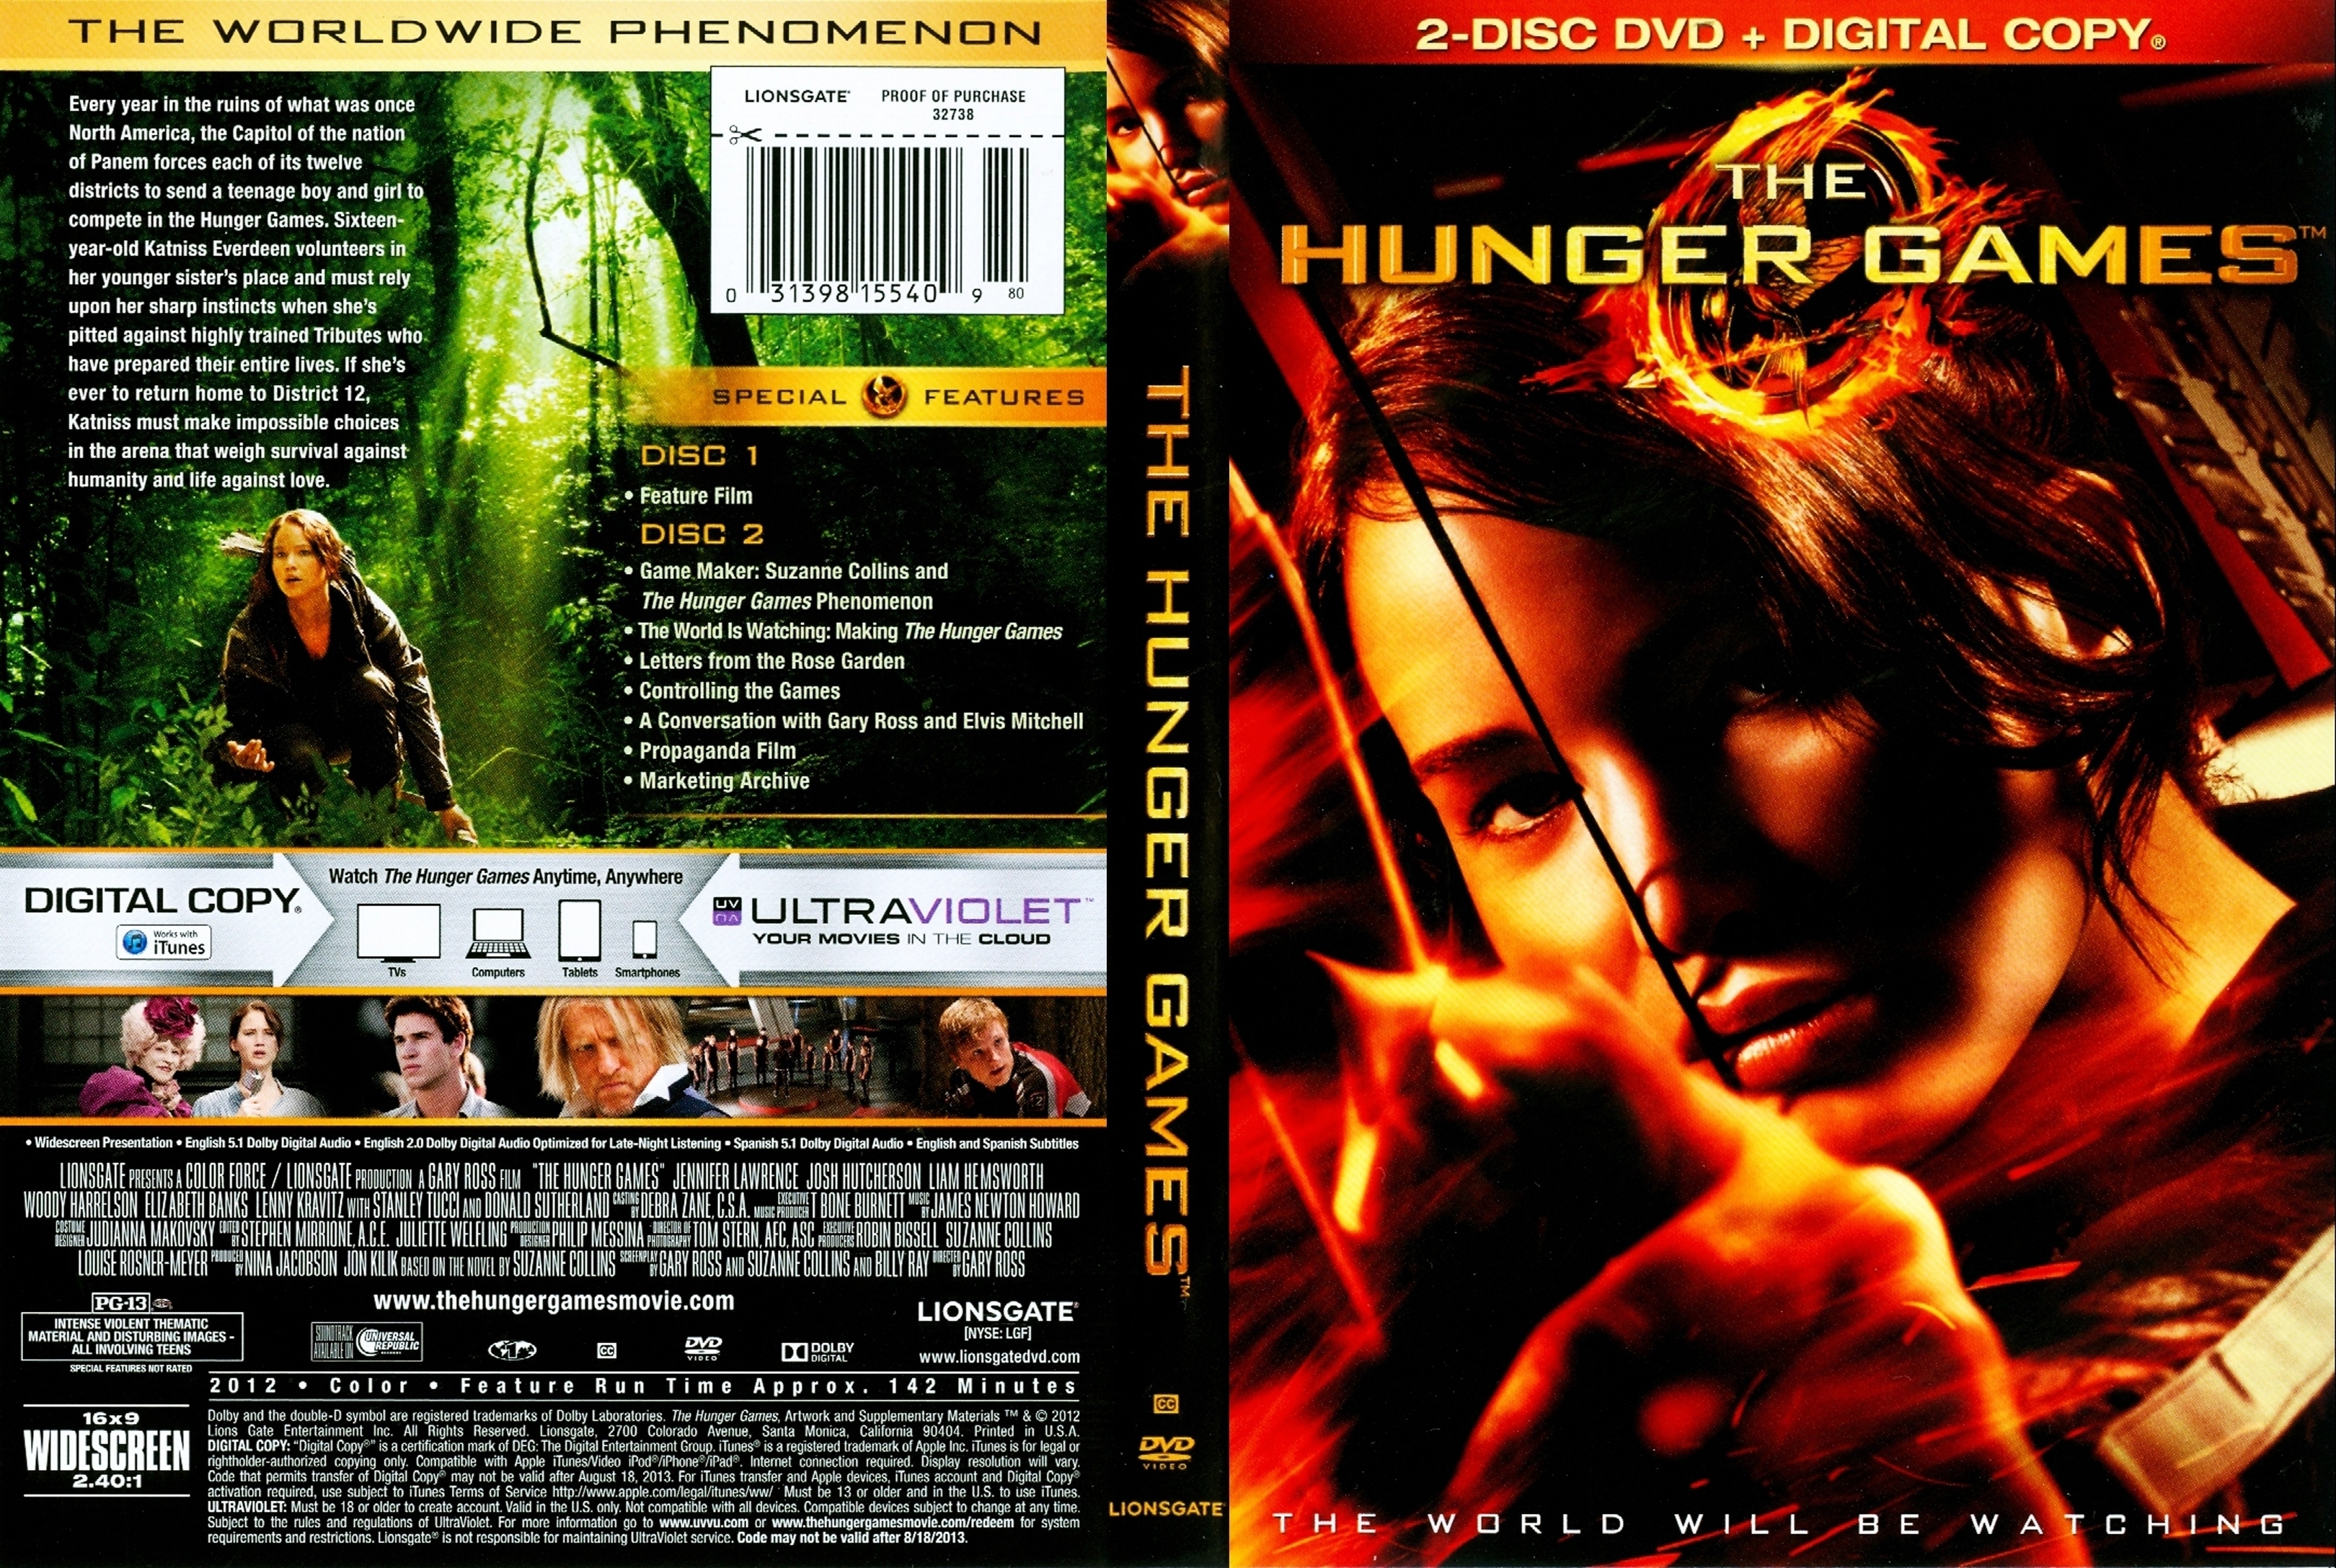 Jaquette DVD The Hunger games Zone 1